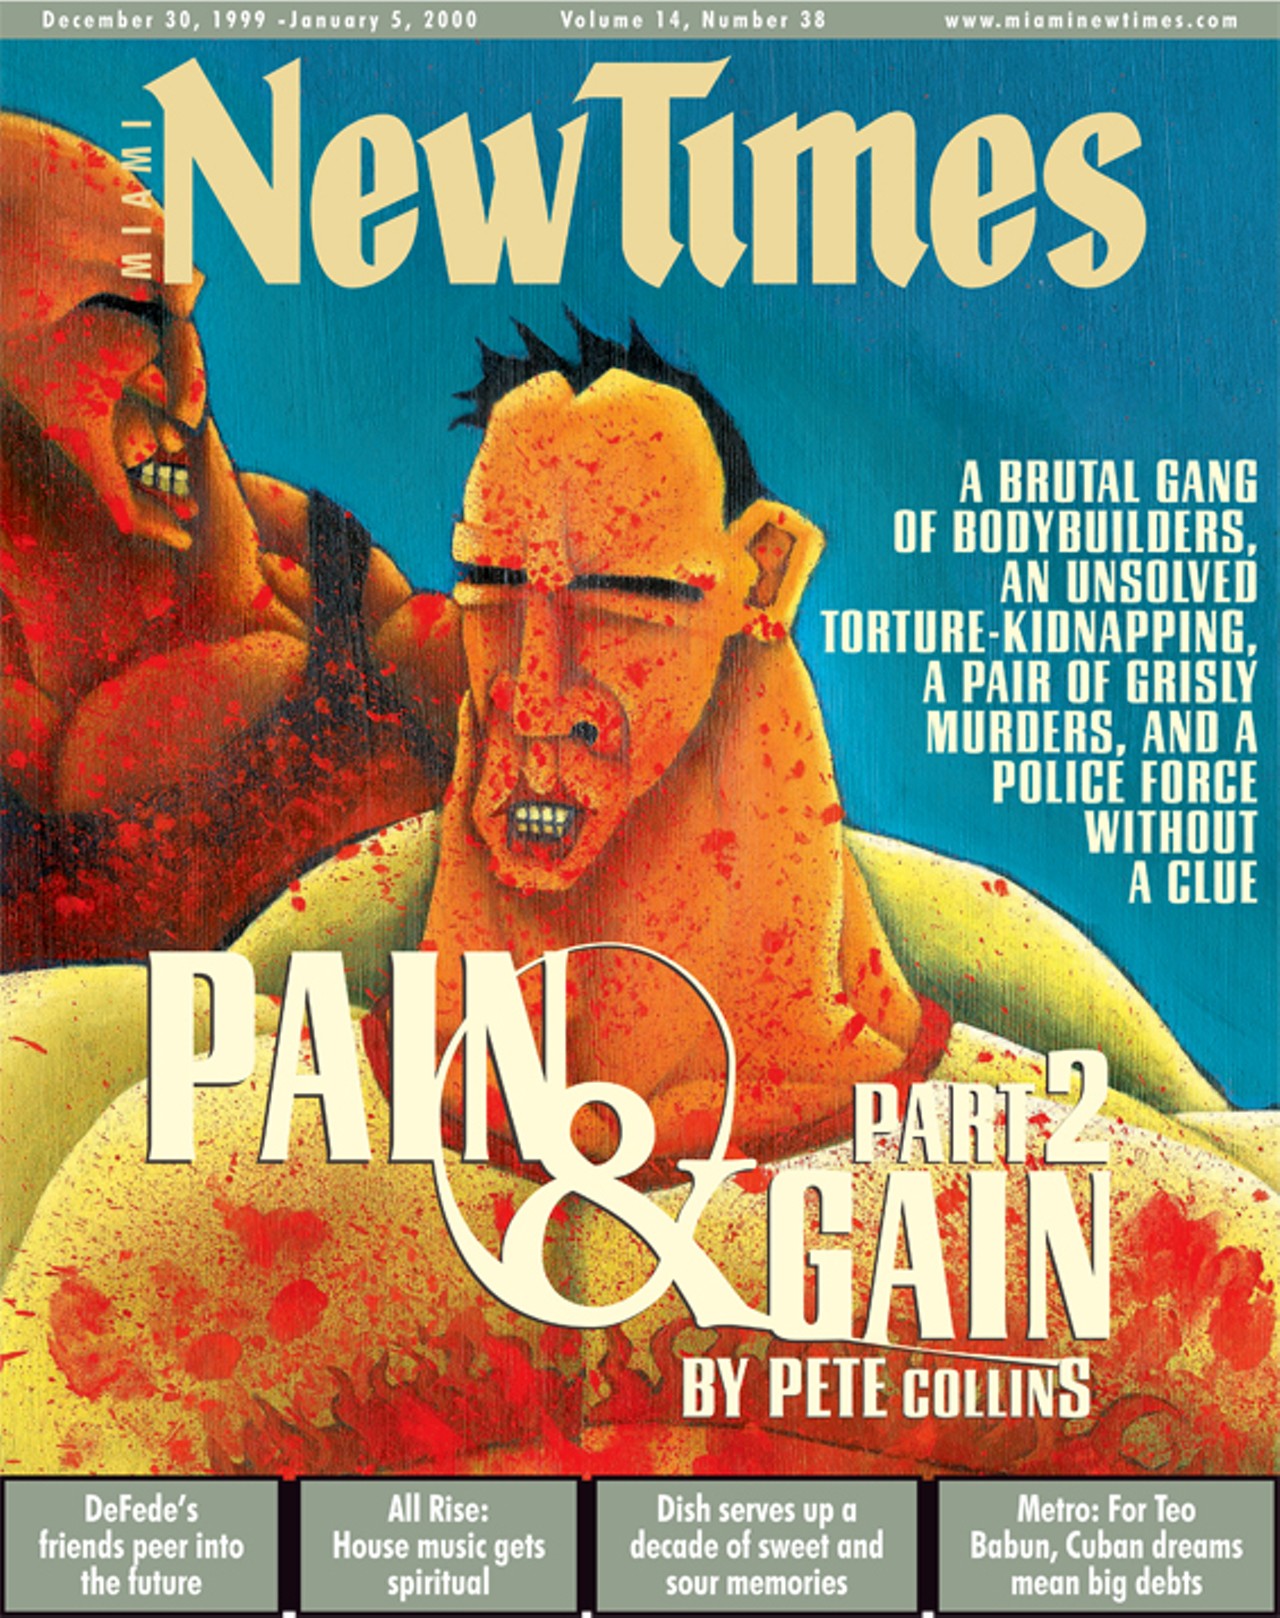 The cover of "Pain & Gain, Part 2", December 30, 1999.